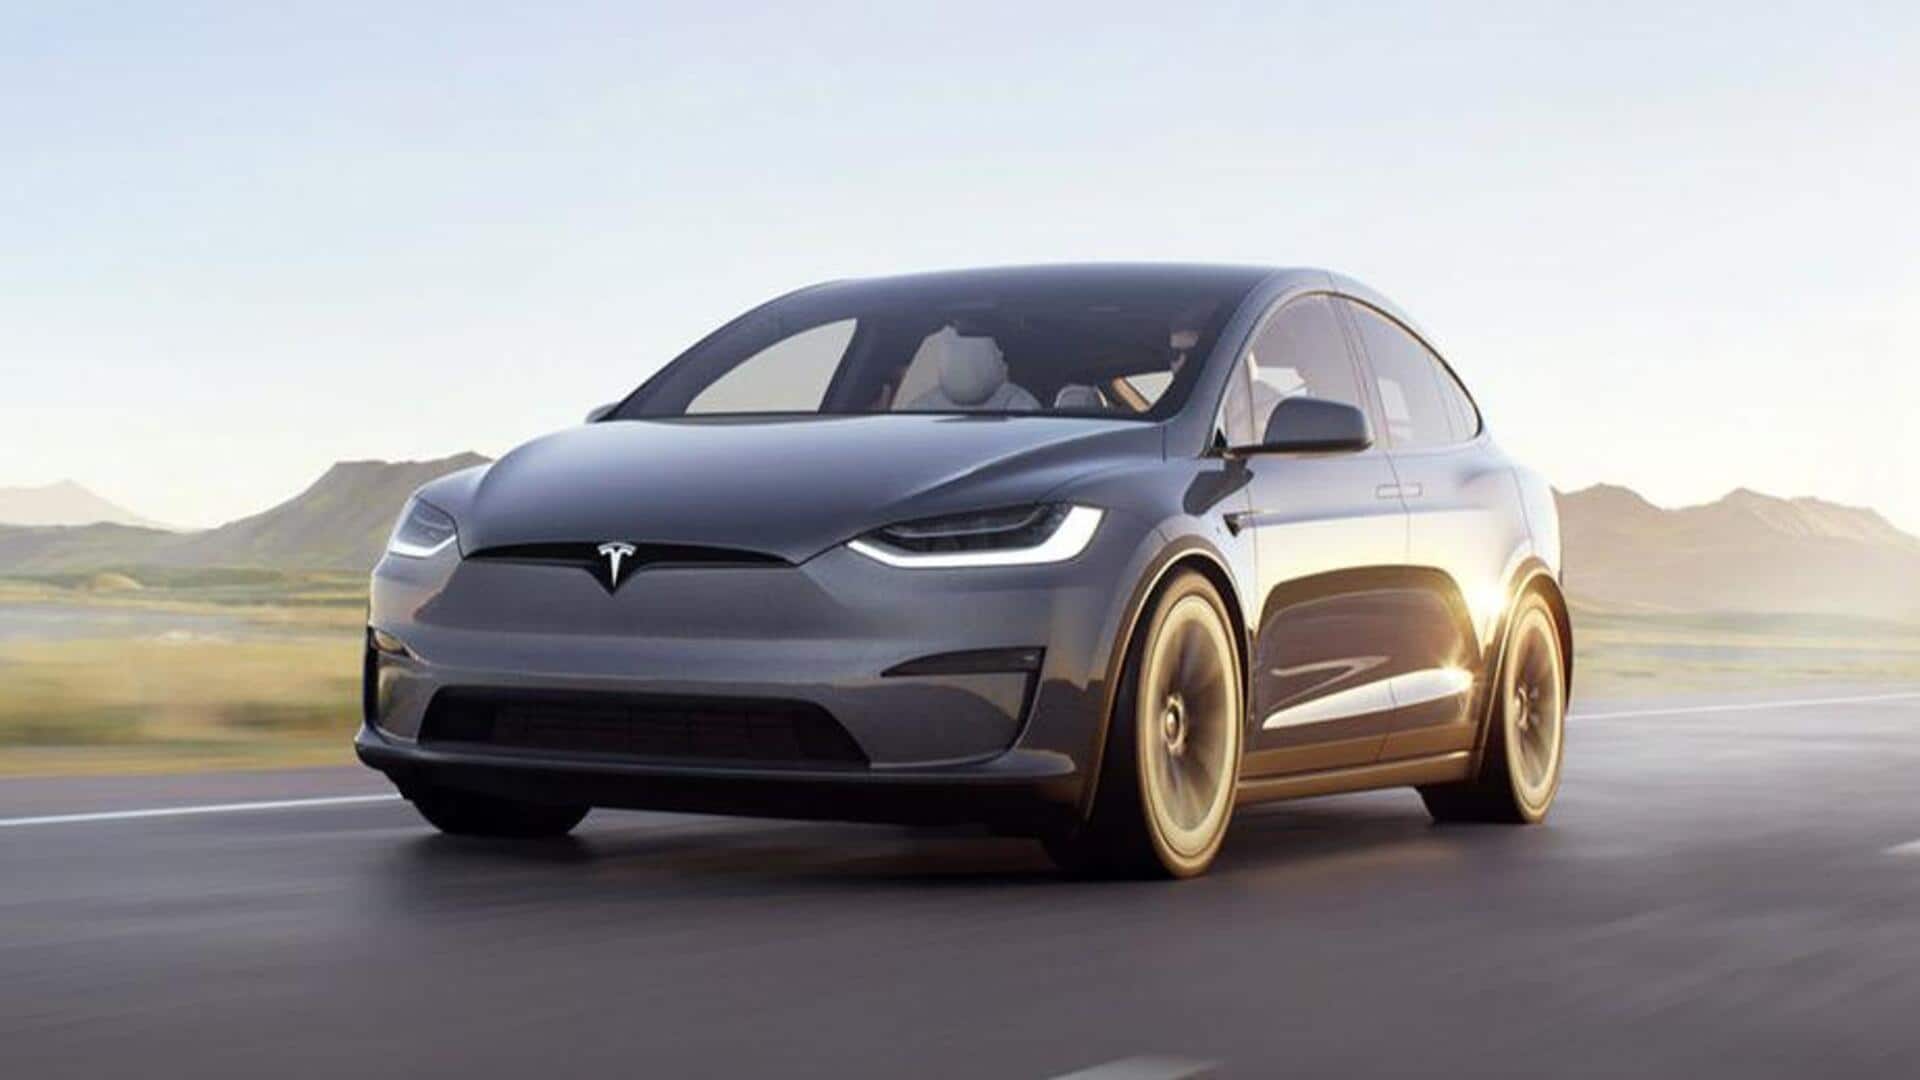 Tesla recalls nearly 55,000 Model X units: Here's why